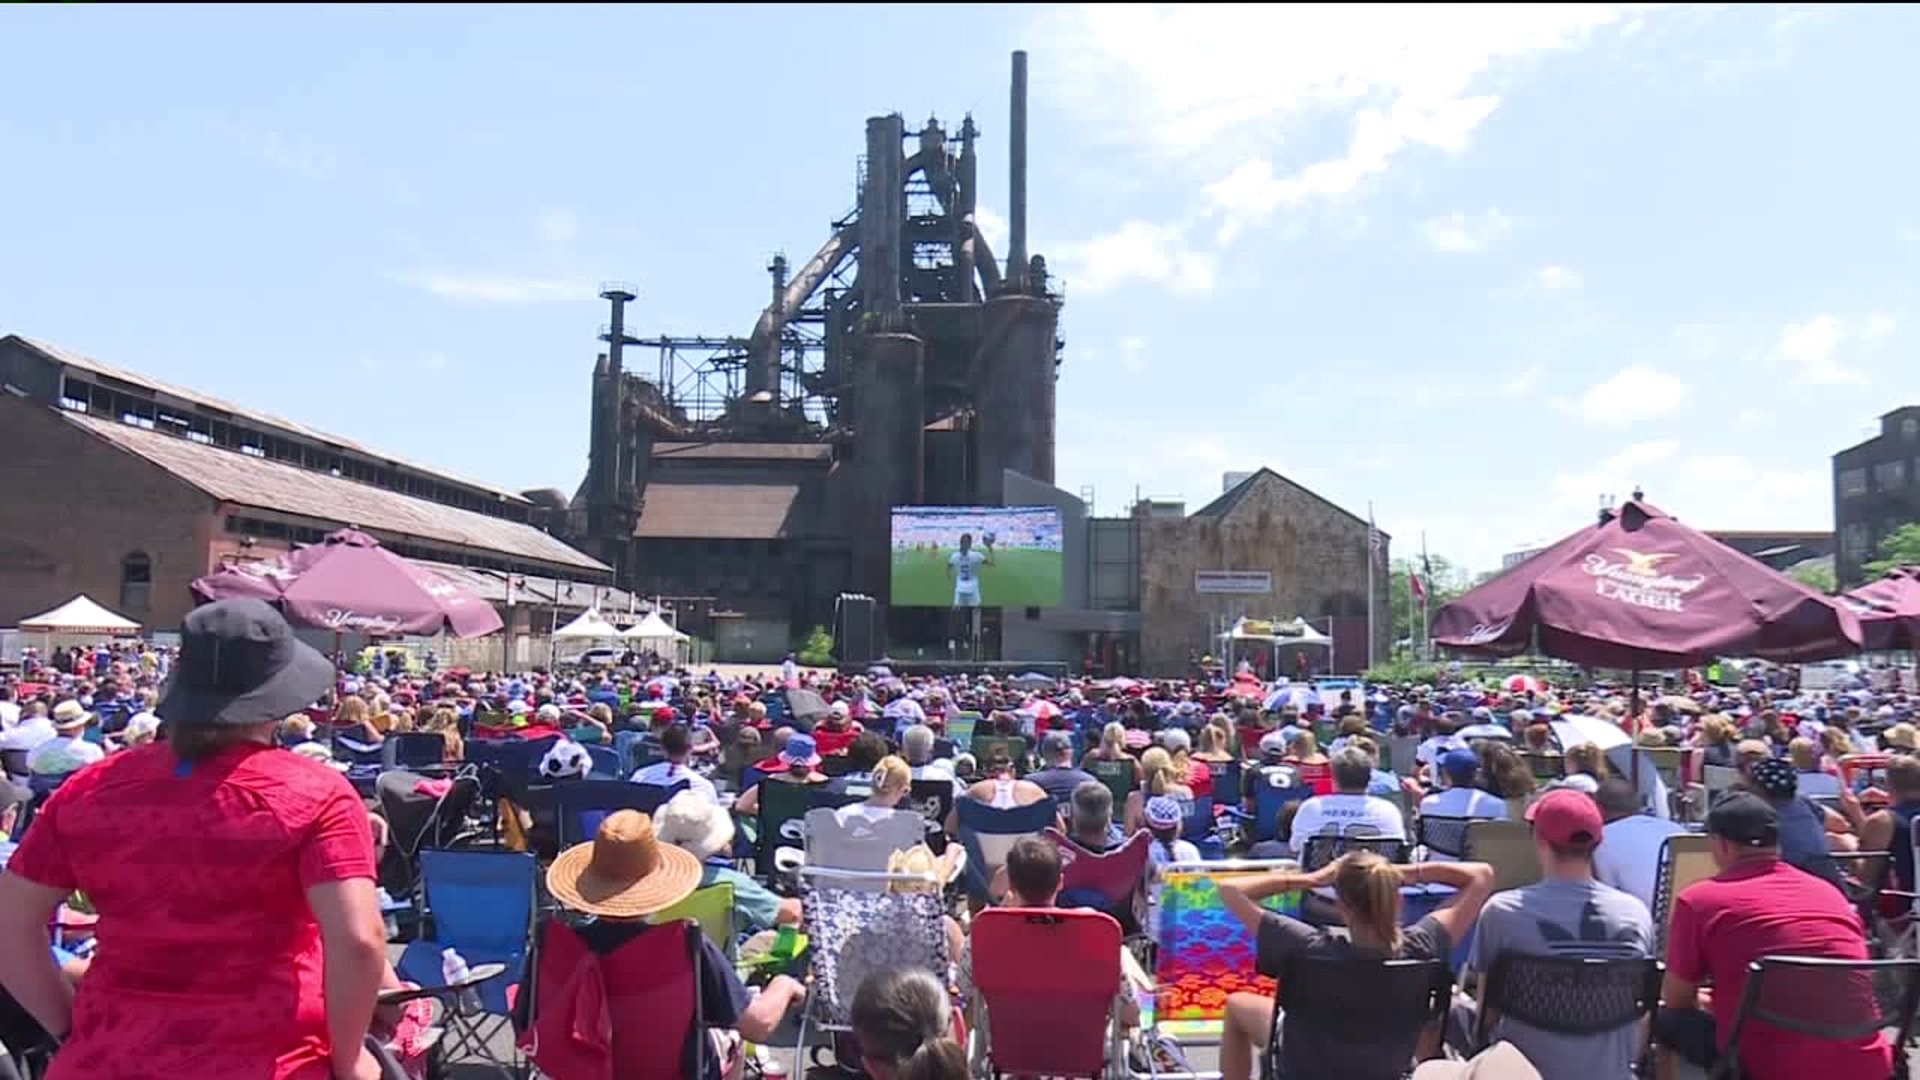 Thousands Gather for Watch Party in Lehigh Valley to Root for U.S. in Women's World Cup